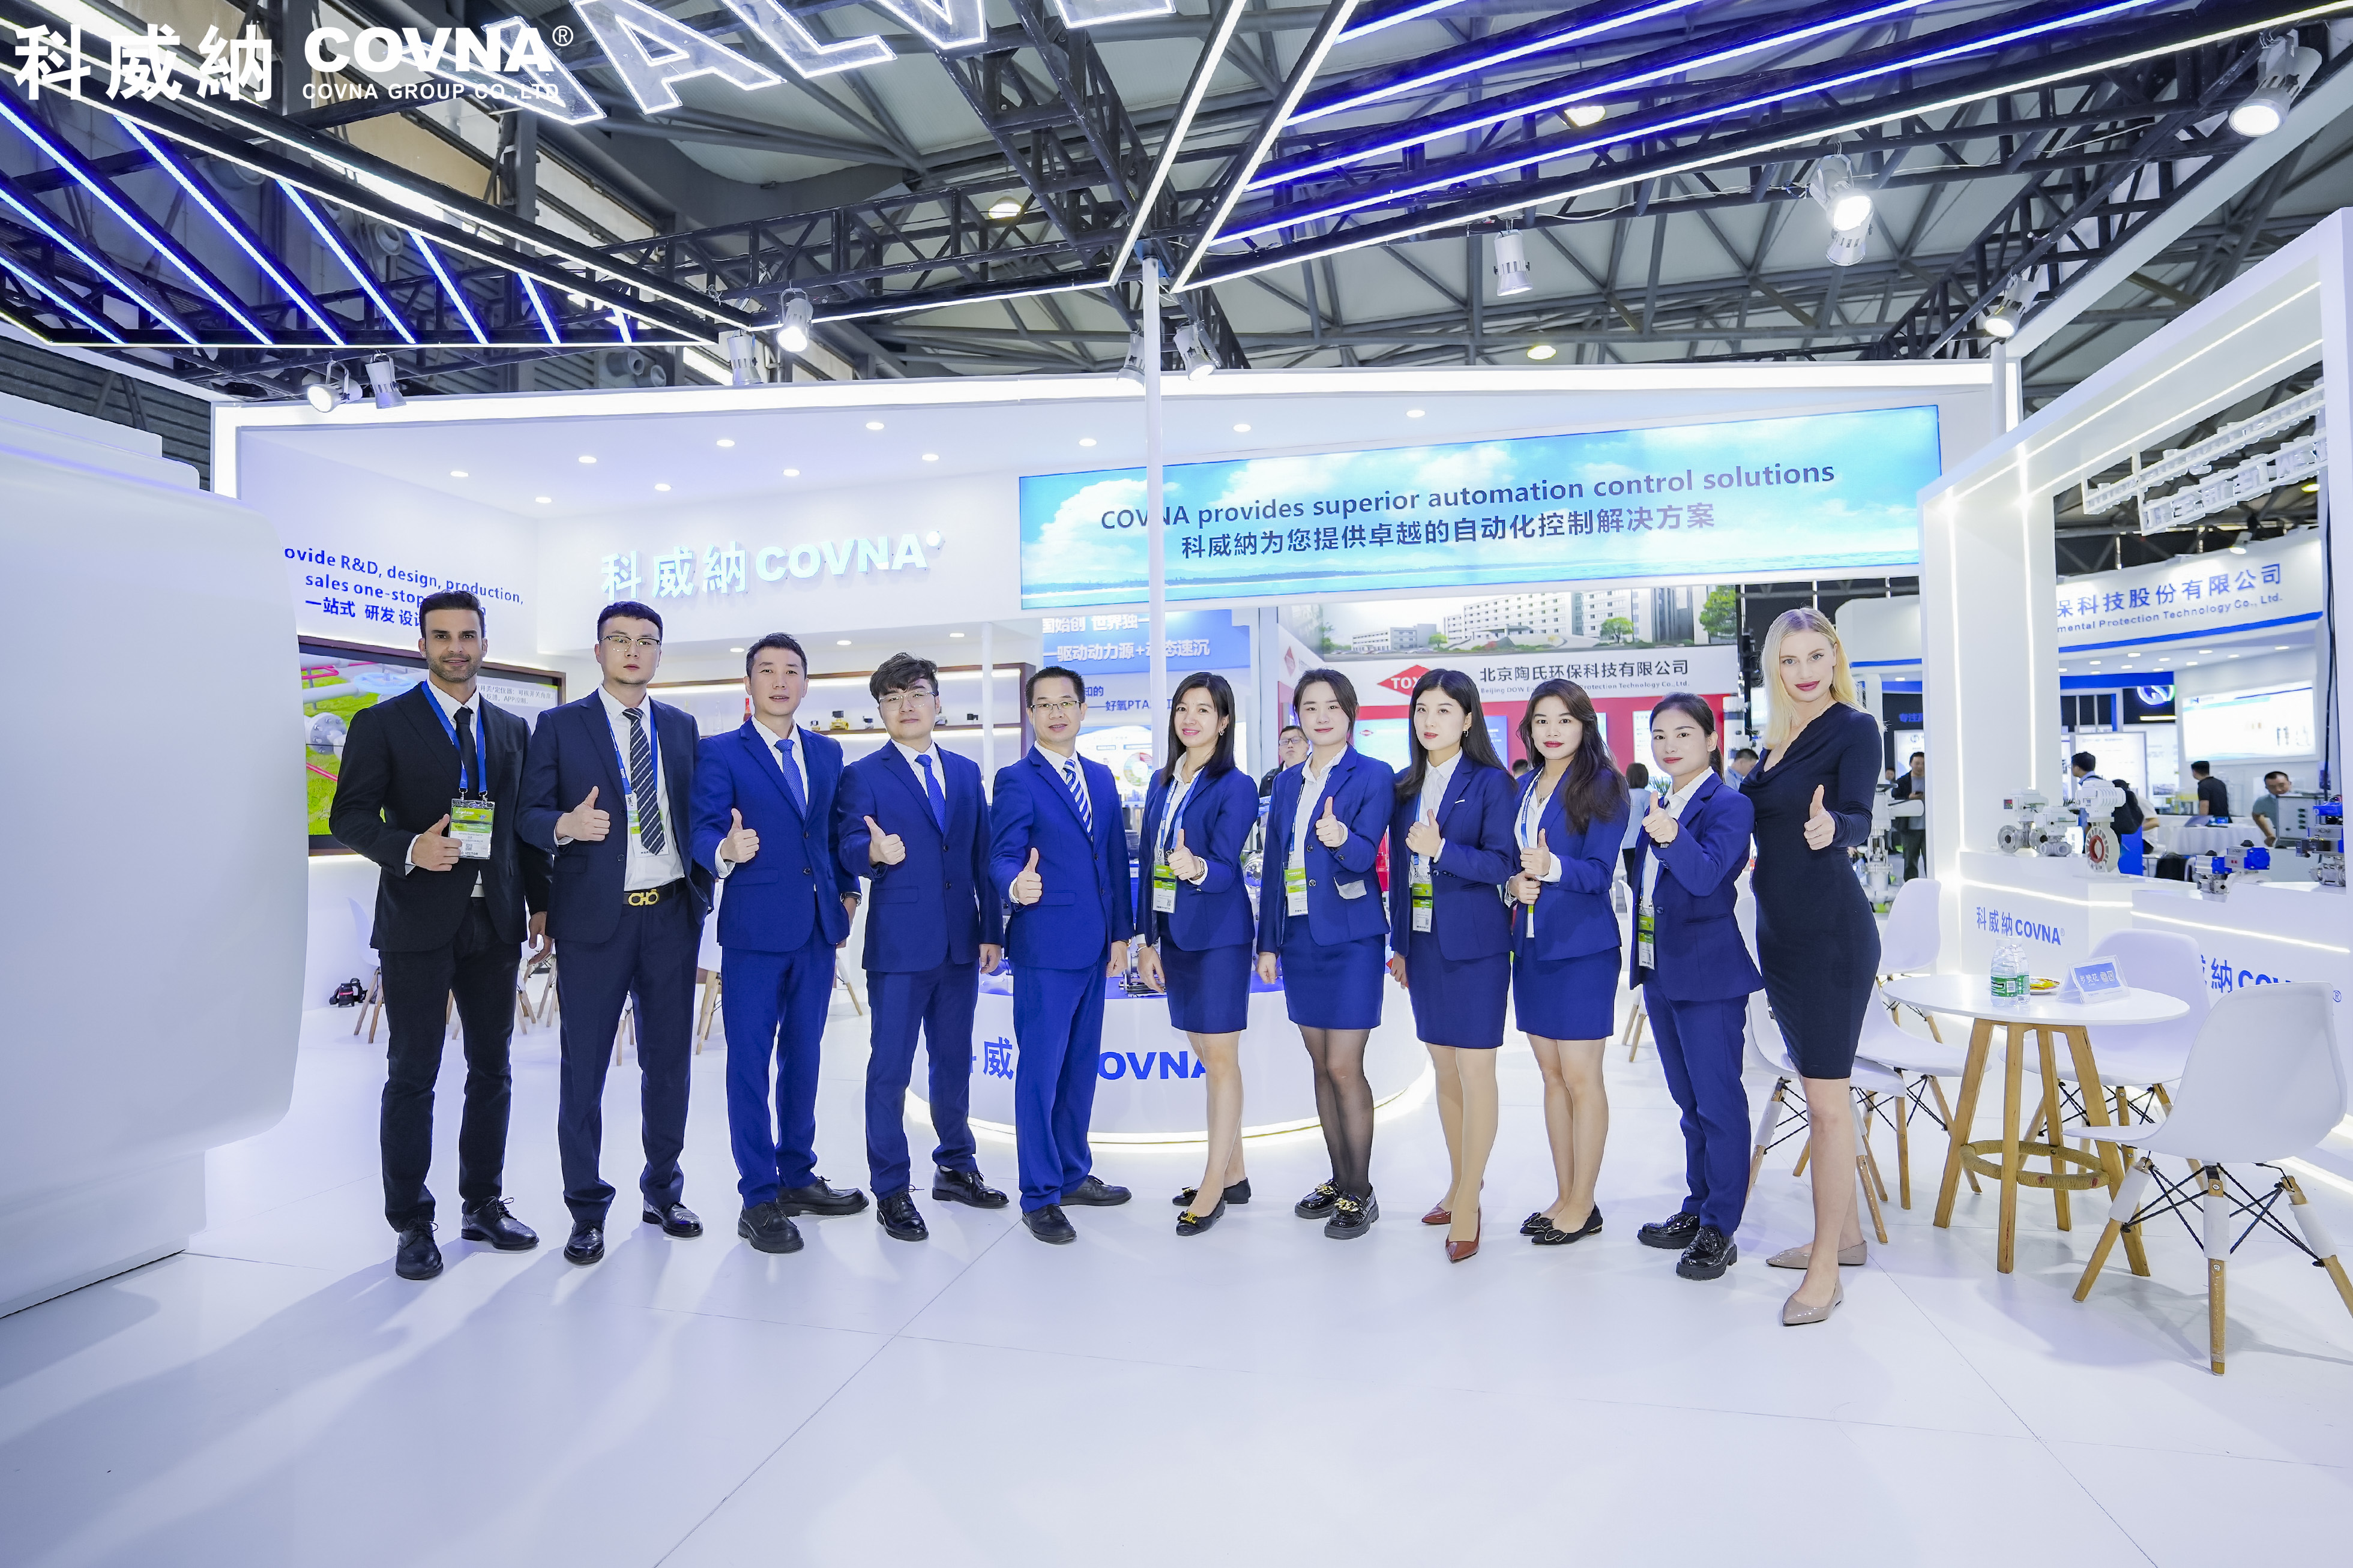 Review of the Exhibition | COVNA's New Product Release in Shanghai